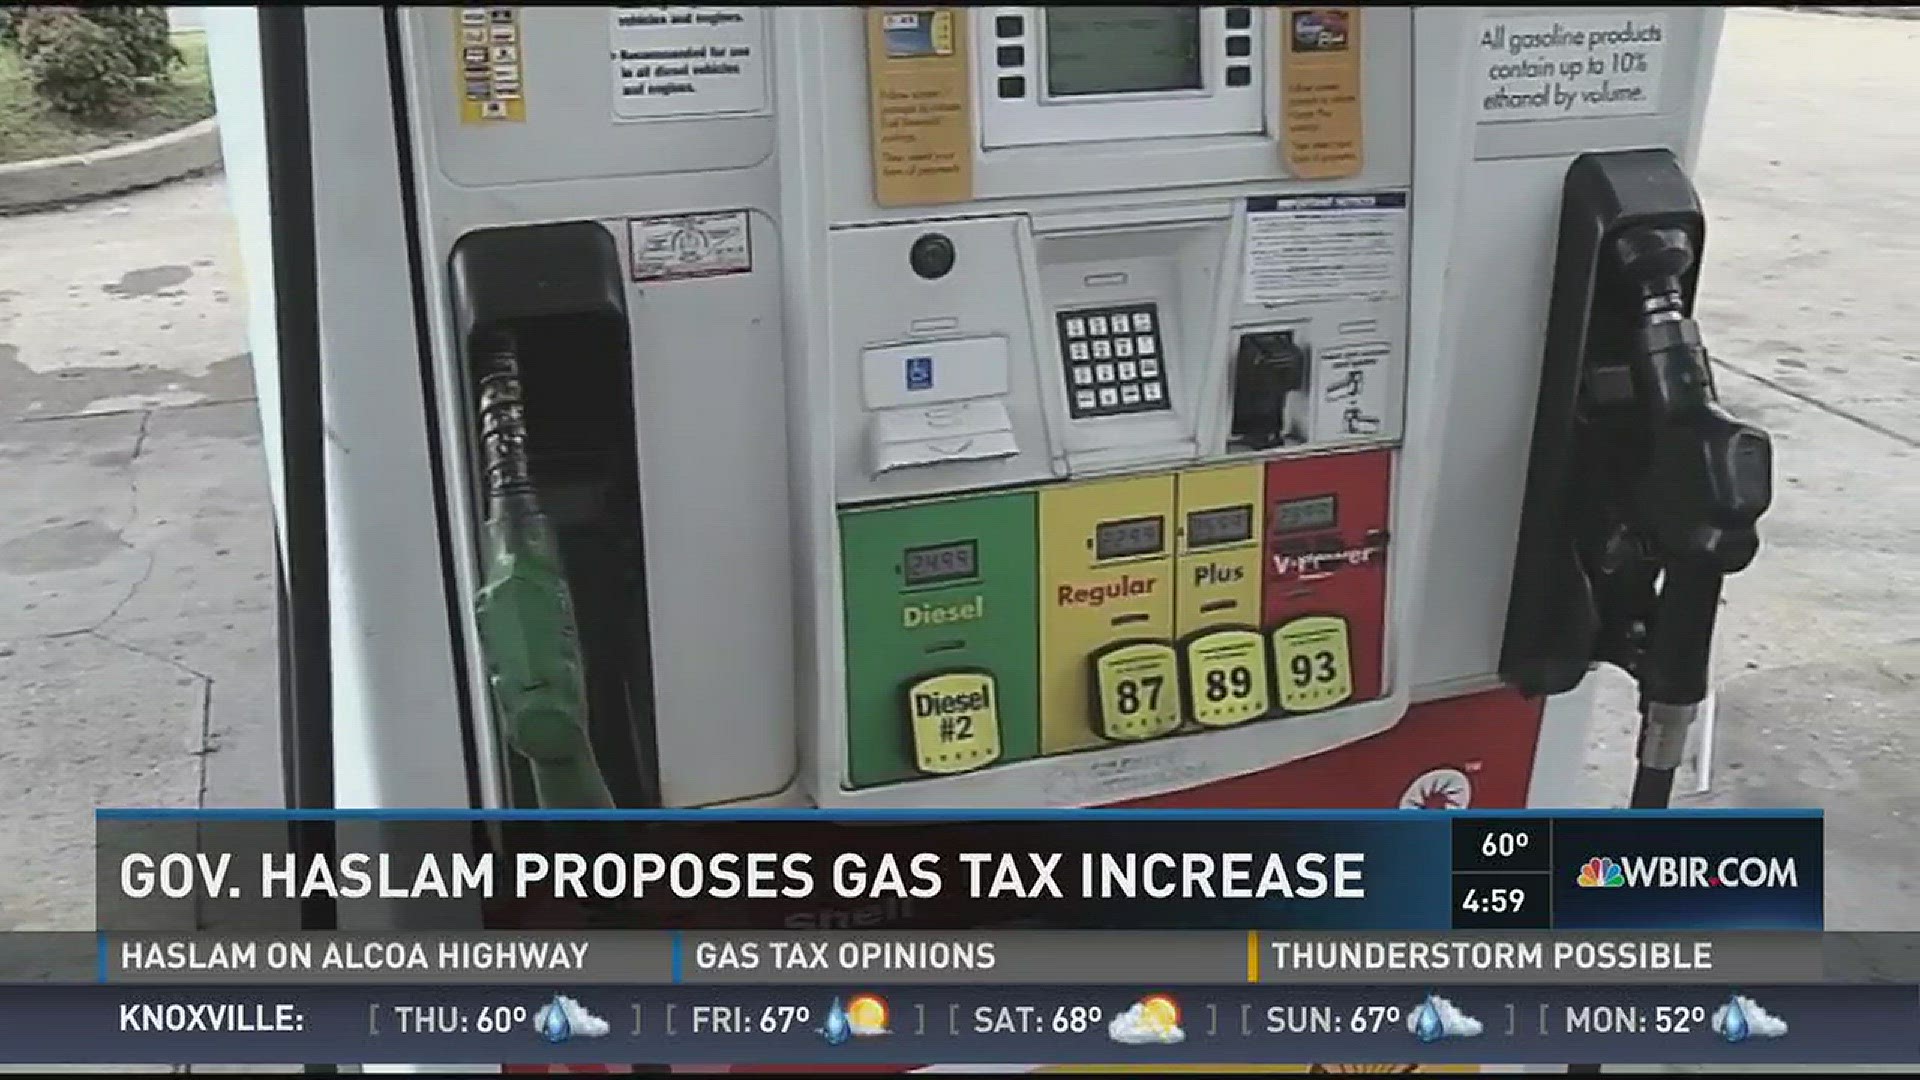 Jan 18, 2017: Governor Haslam proposed a 7-cent increase to the consumer gas tax to fund infrastructure improvements and repairs.